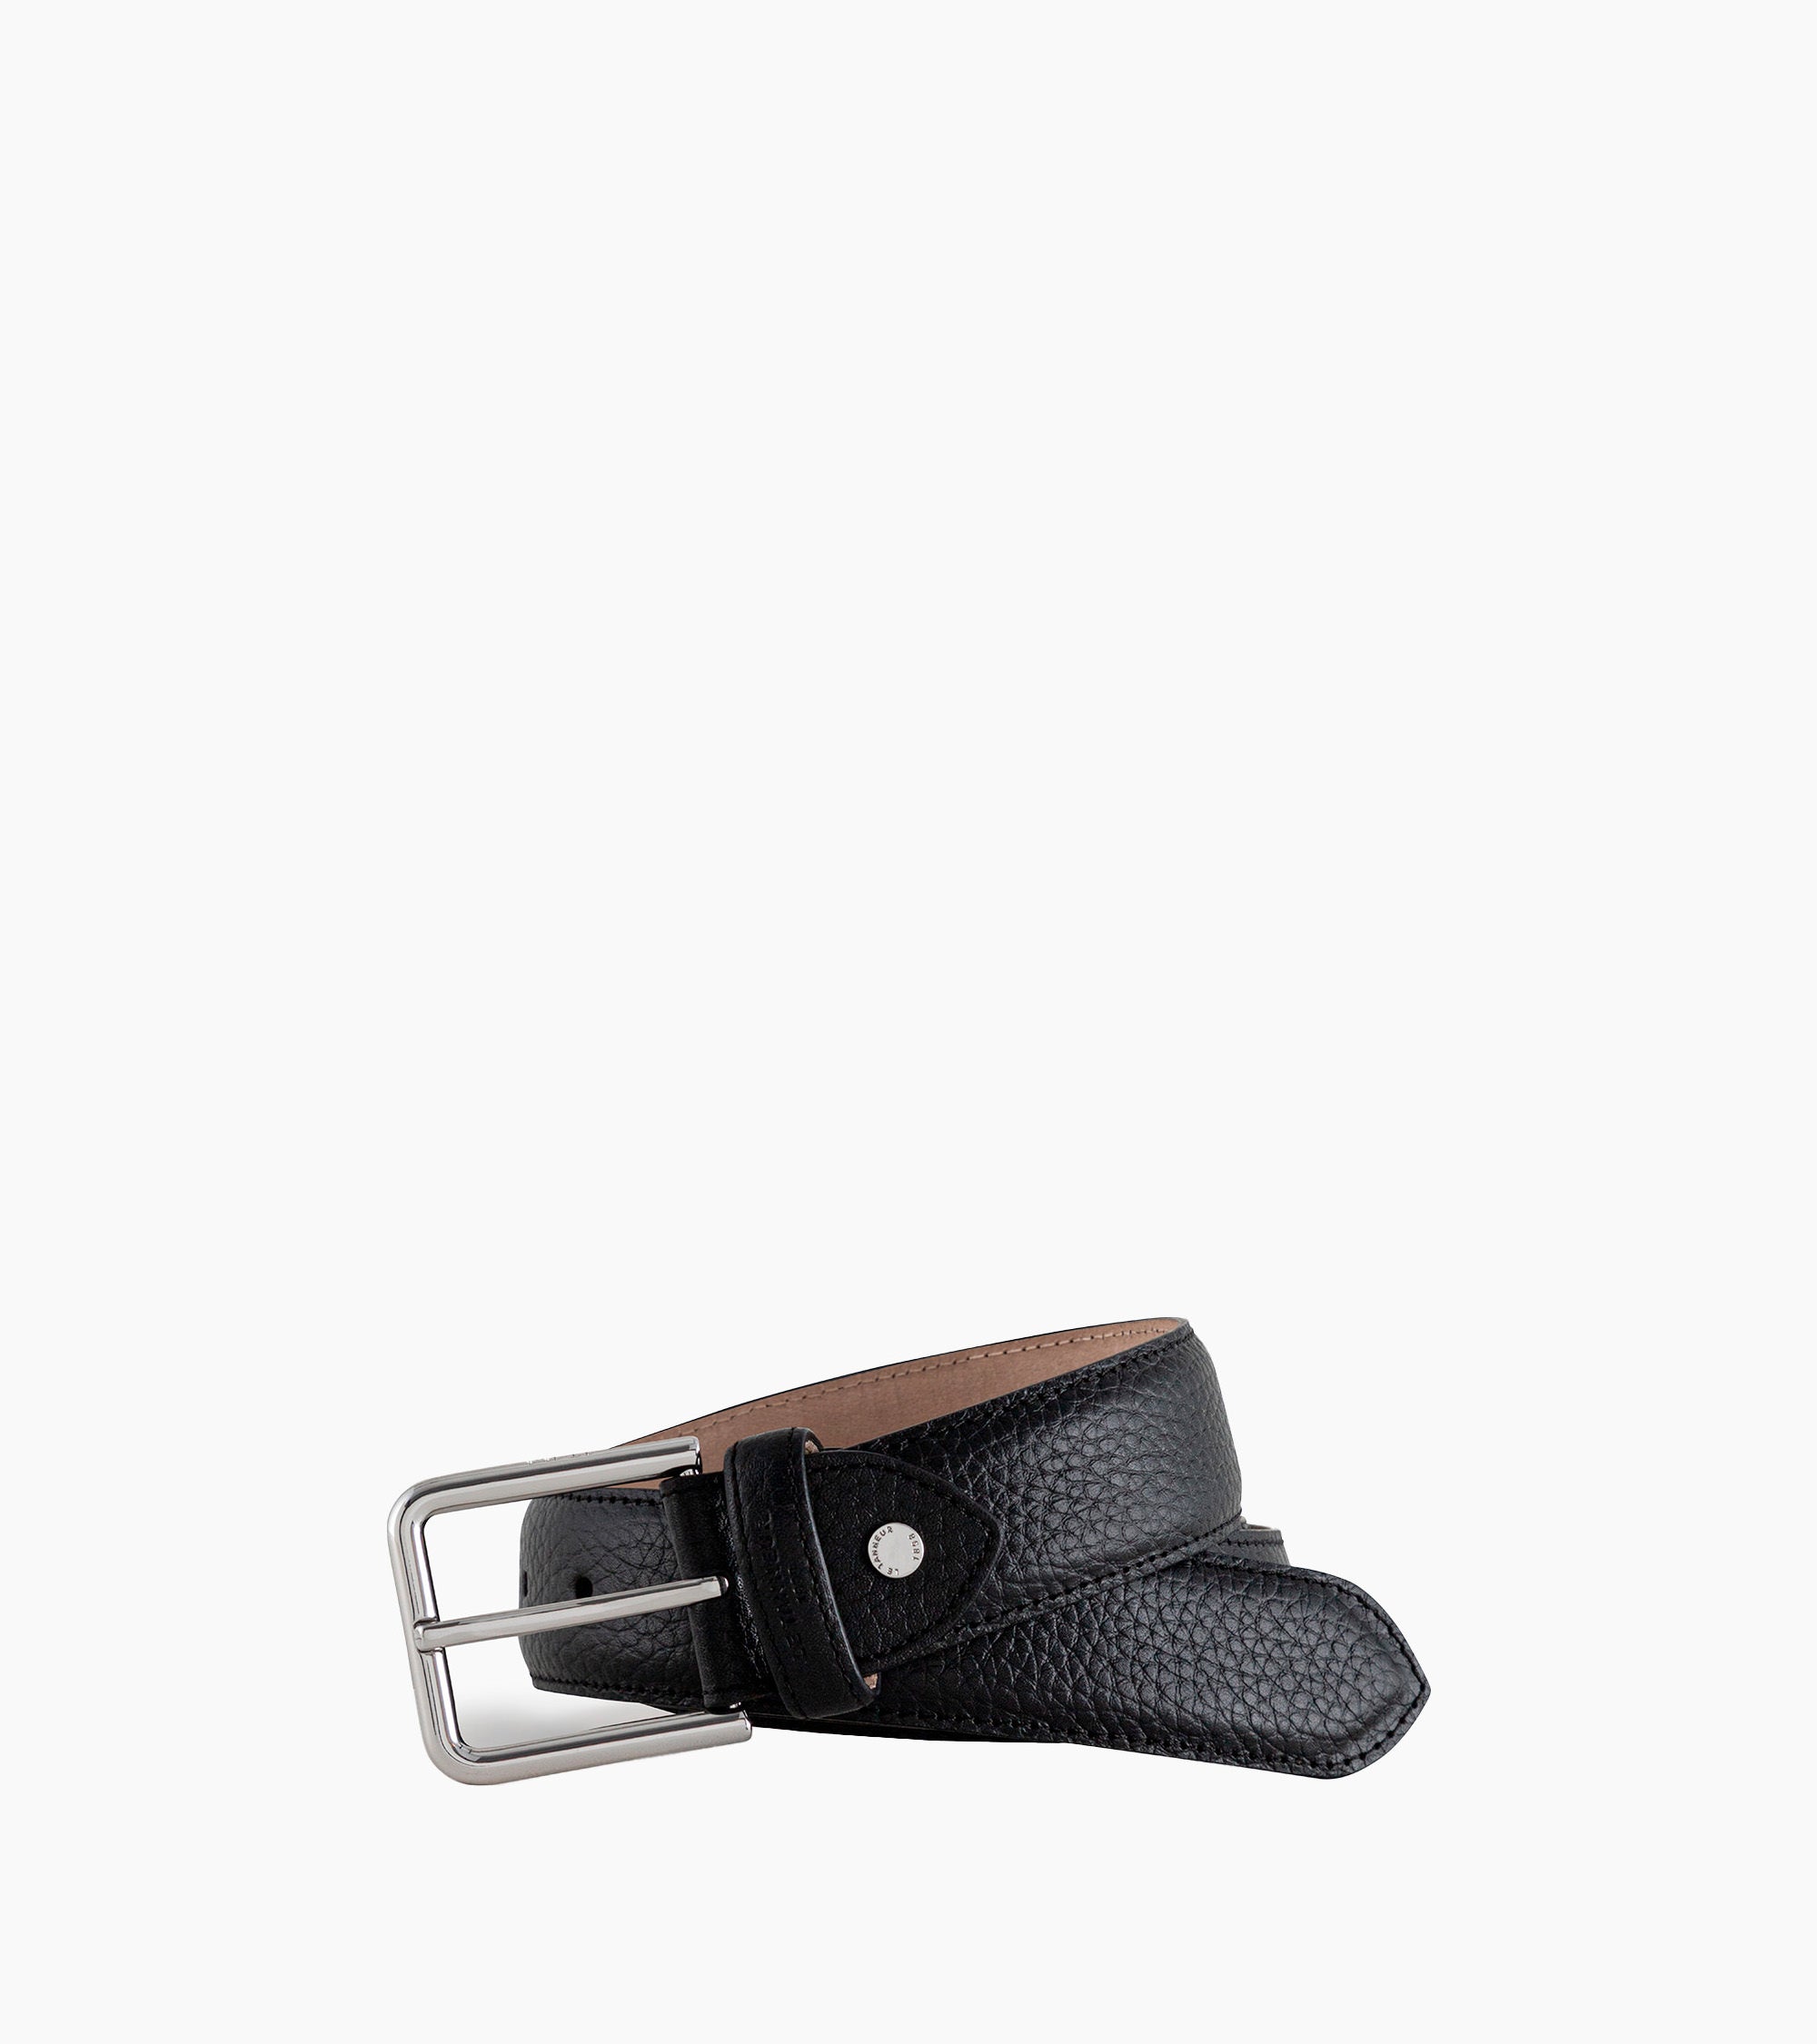 Charles smooth leather men's belt with square buckle